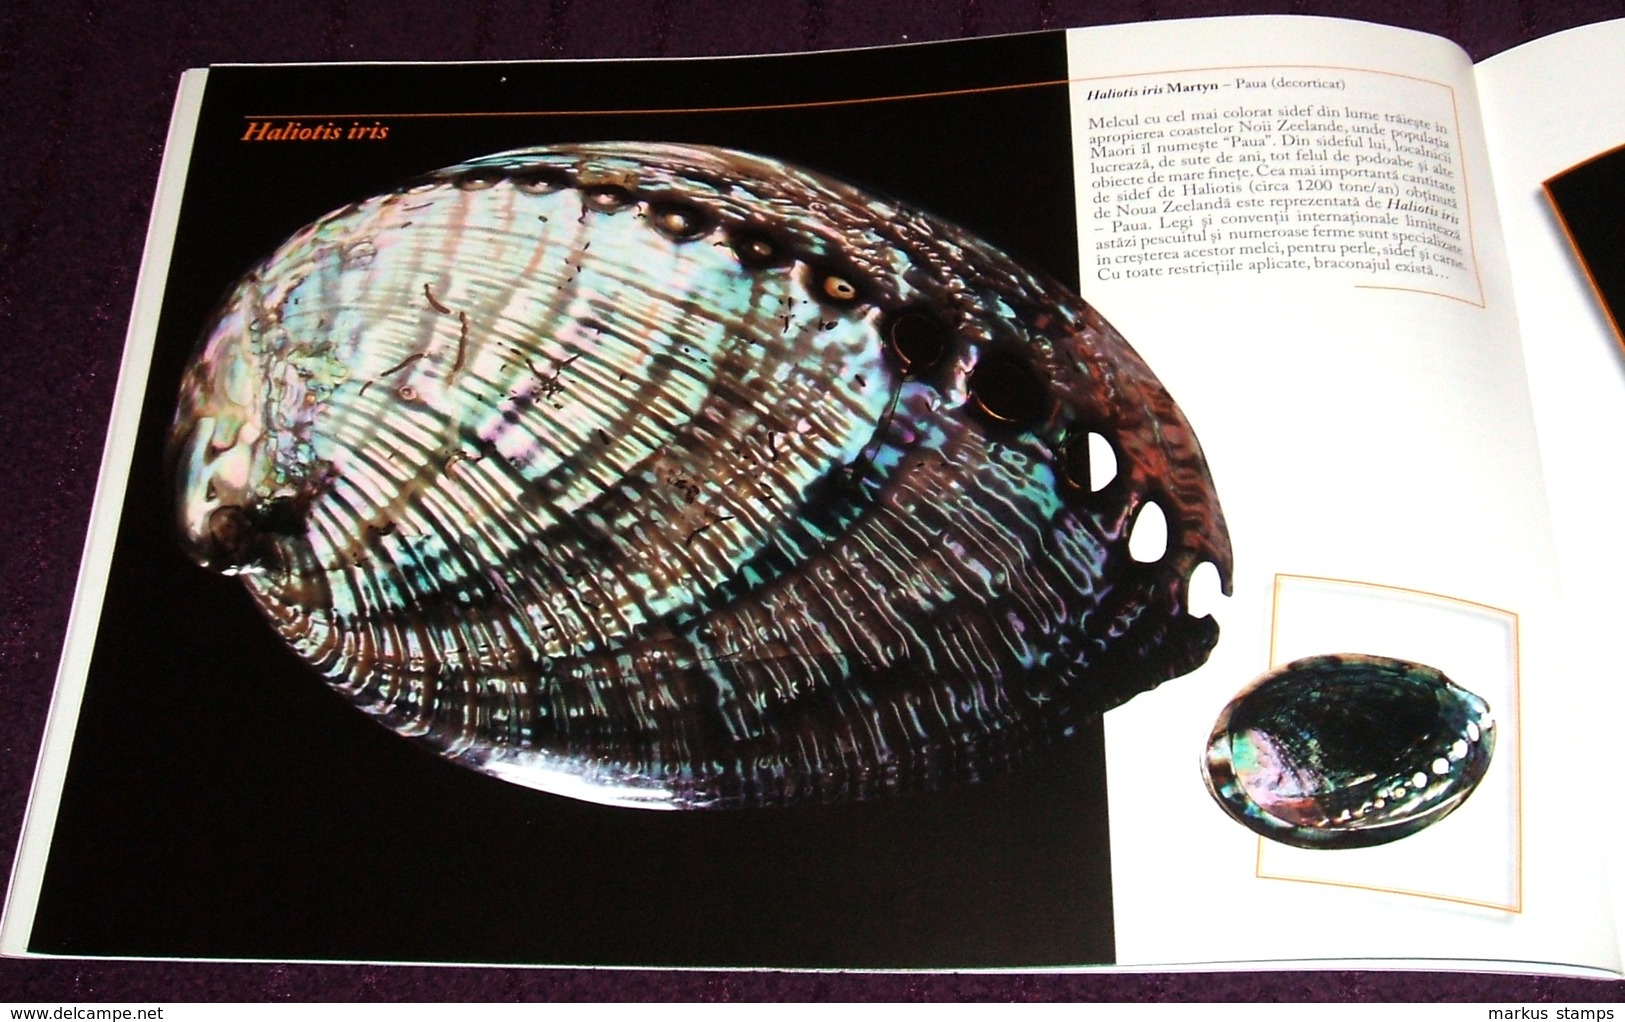 Molluscs from Romanian National Museum of Natural History, illustrated brochure